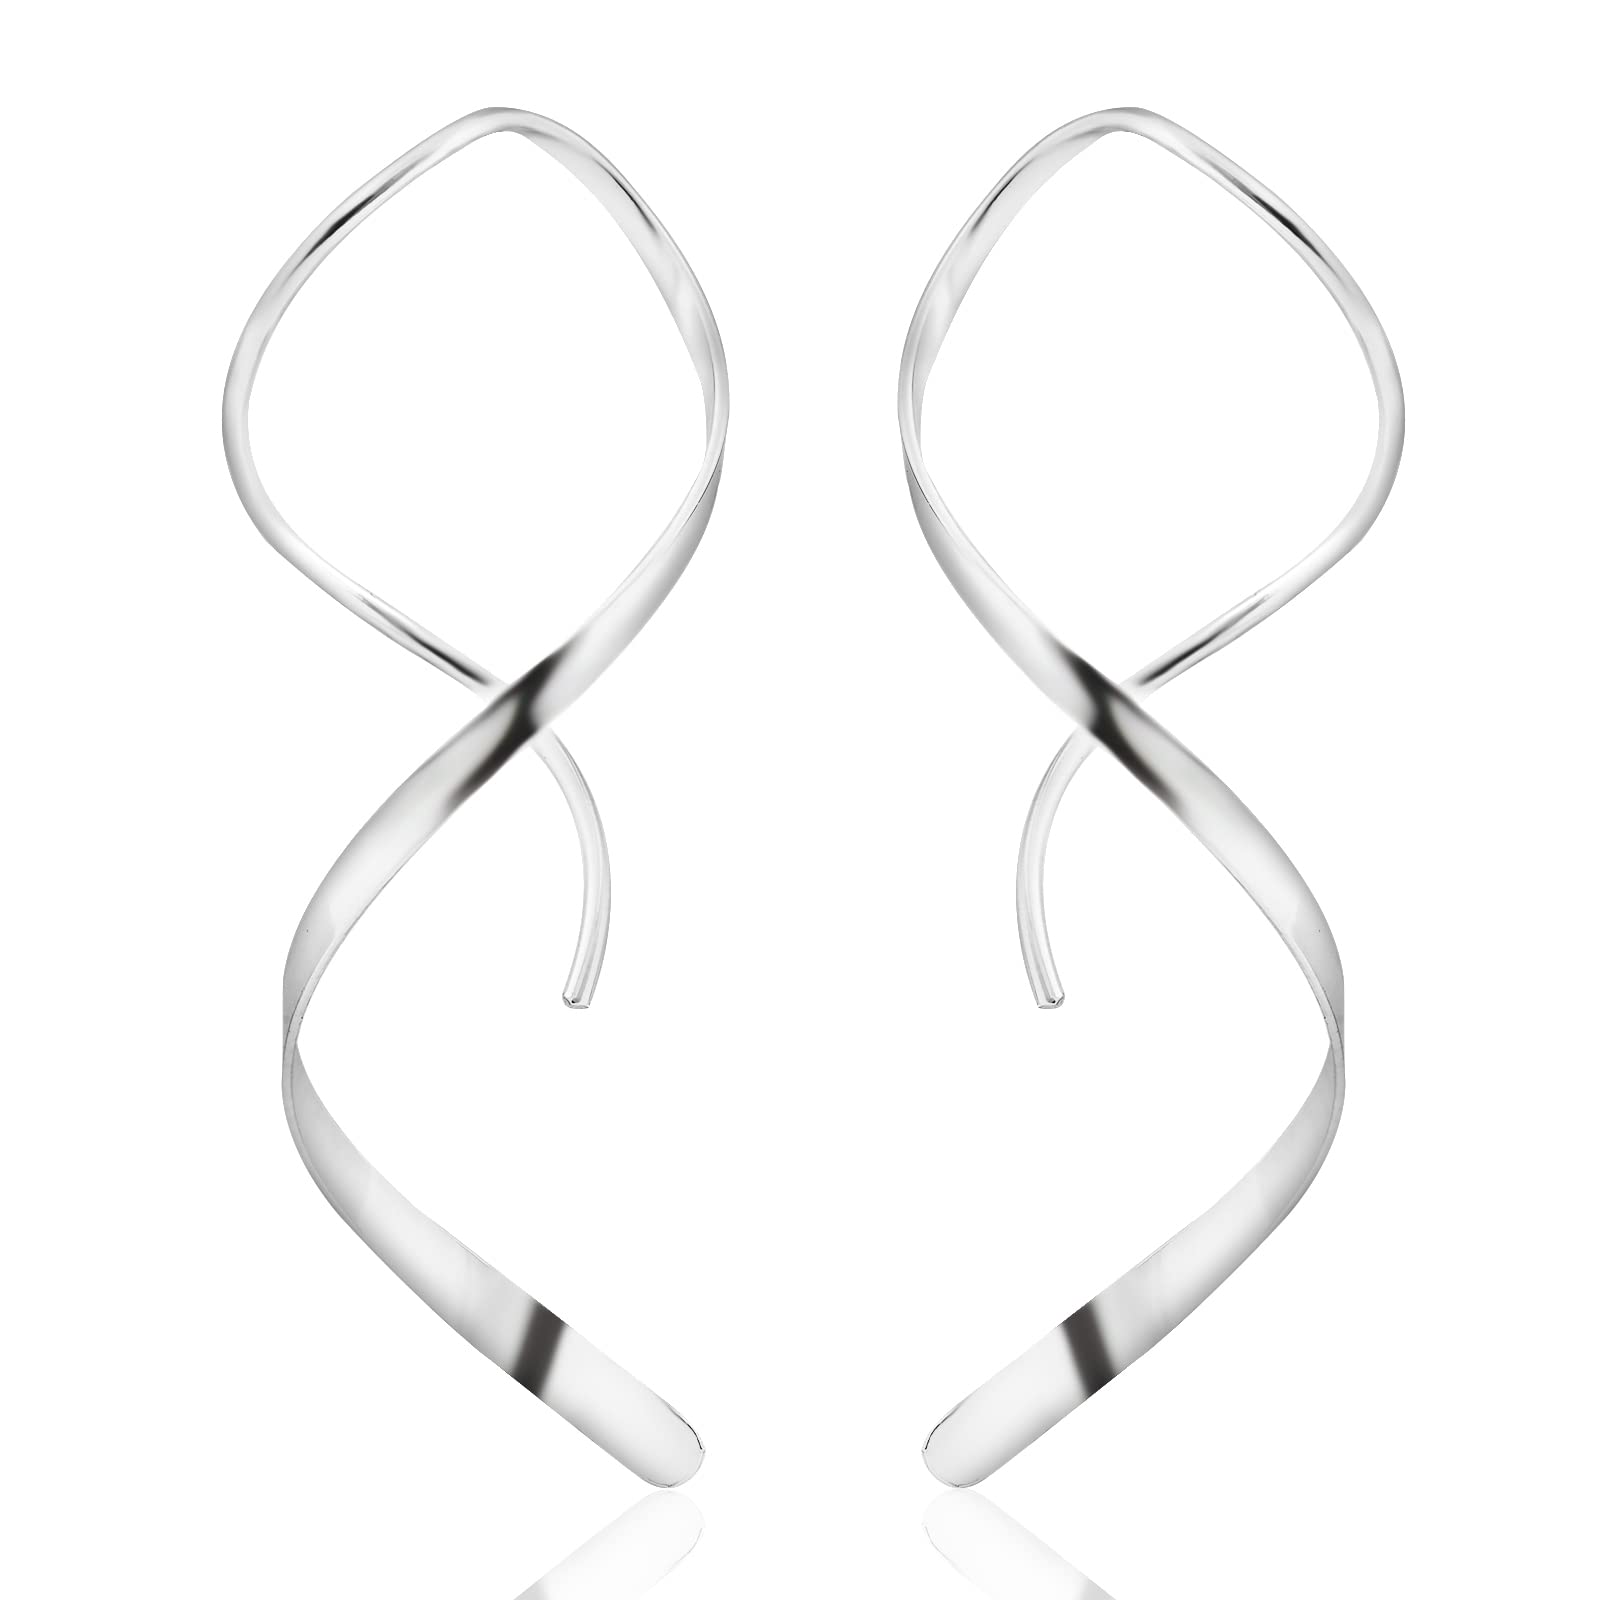 Handmade 925 Sterling Silver Spiral Threader Earrings Hypoallergenic Twisted Curved Drop Dangle Earrings Pull Through Earrings for Women Trendy Fashion-Silver